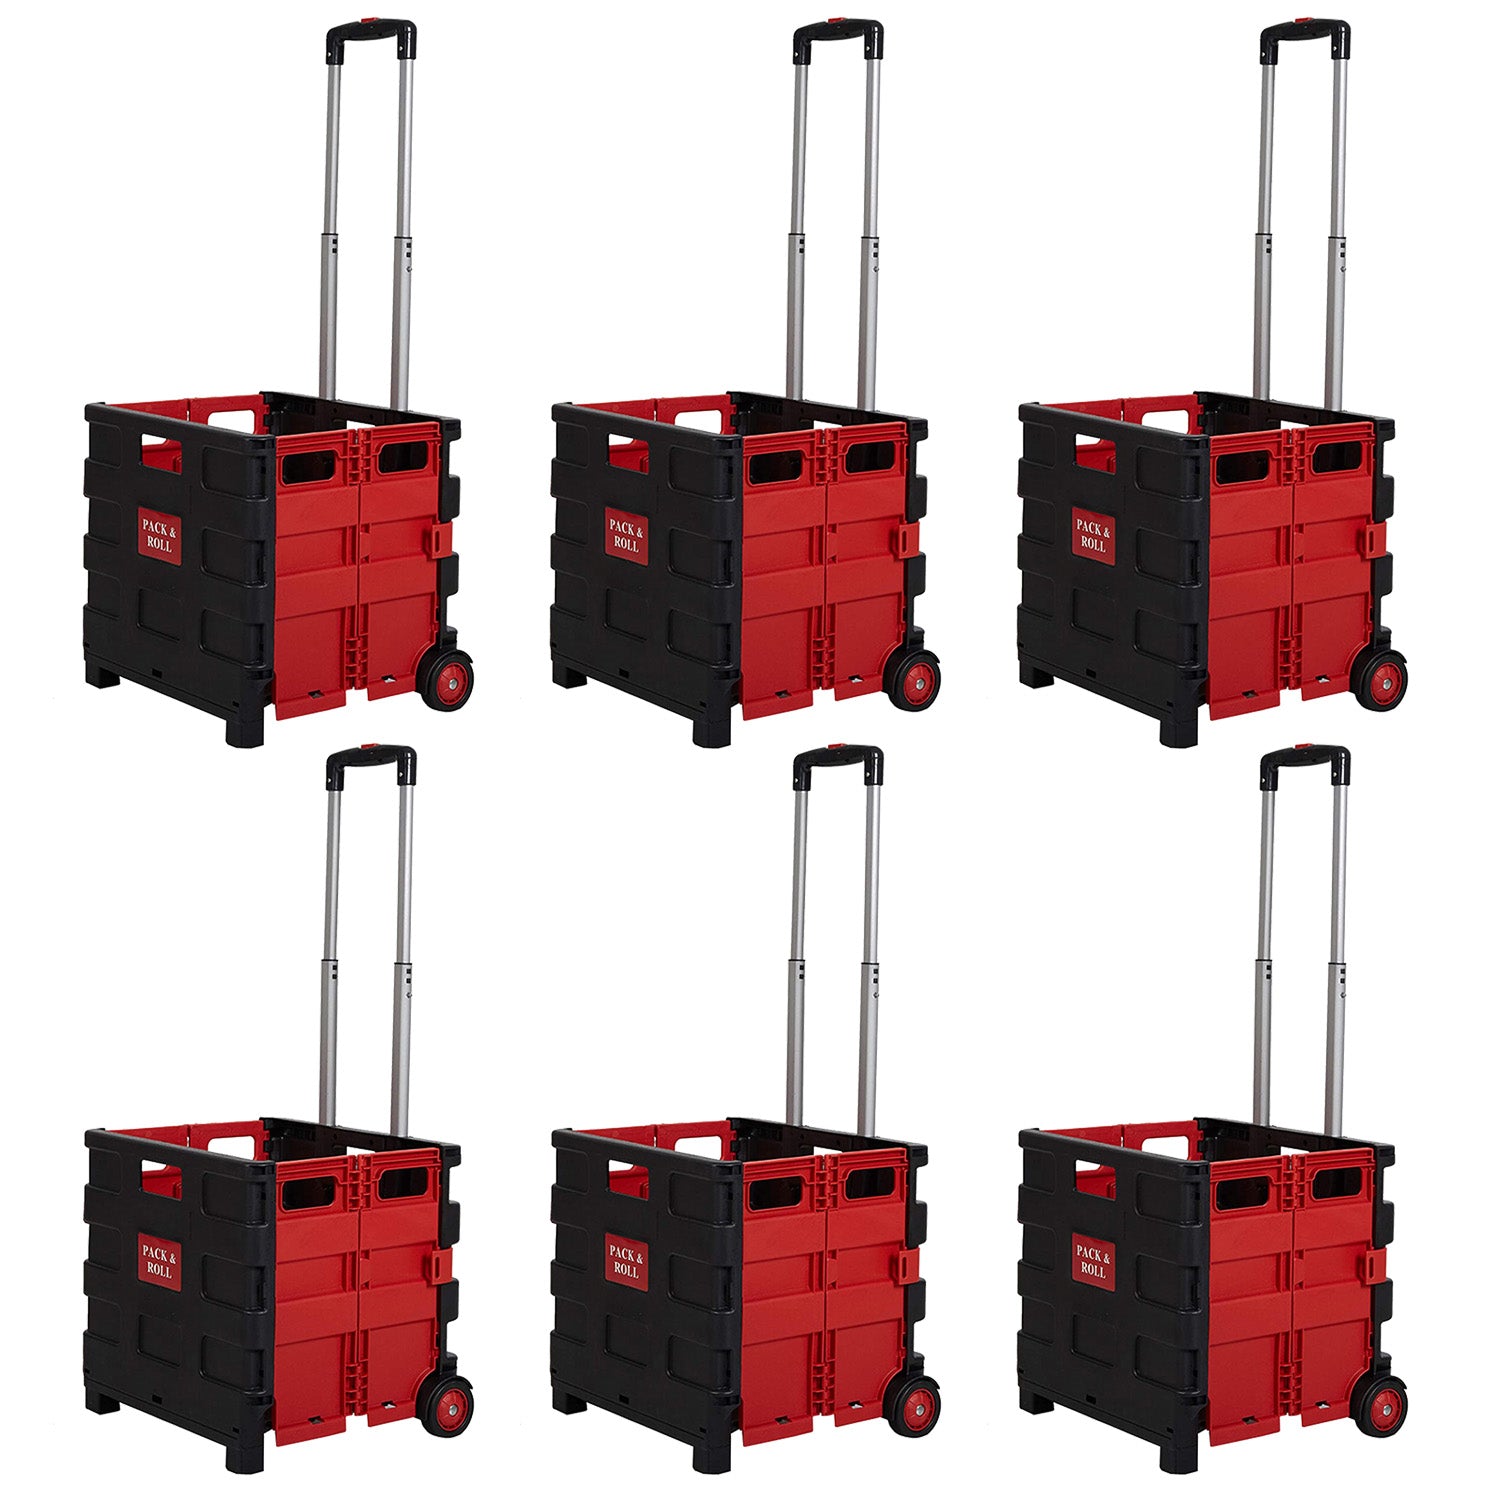 6 Pack Collapsible Rolling Crate Utility Cart 44L Foldable Grocery Cart with Wheels(Red, Medium)